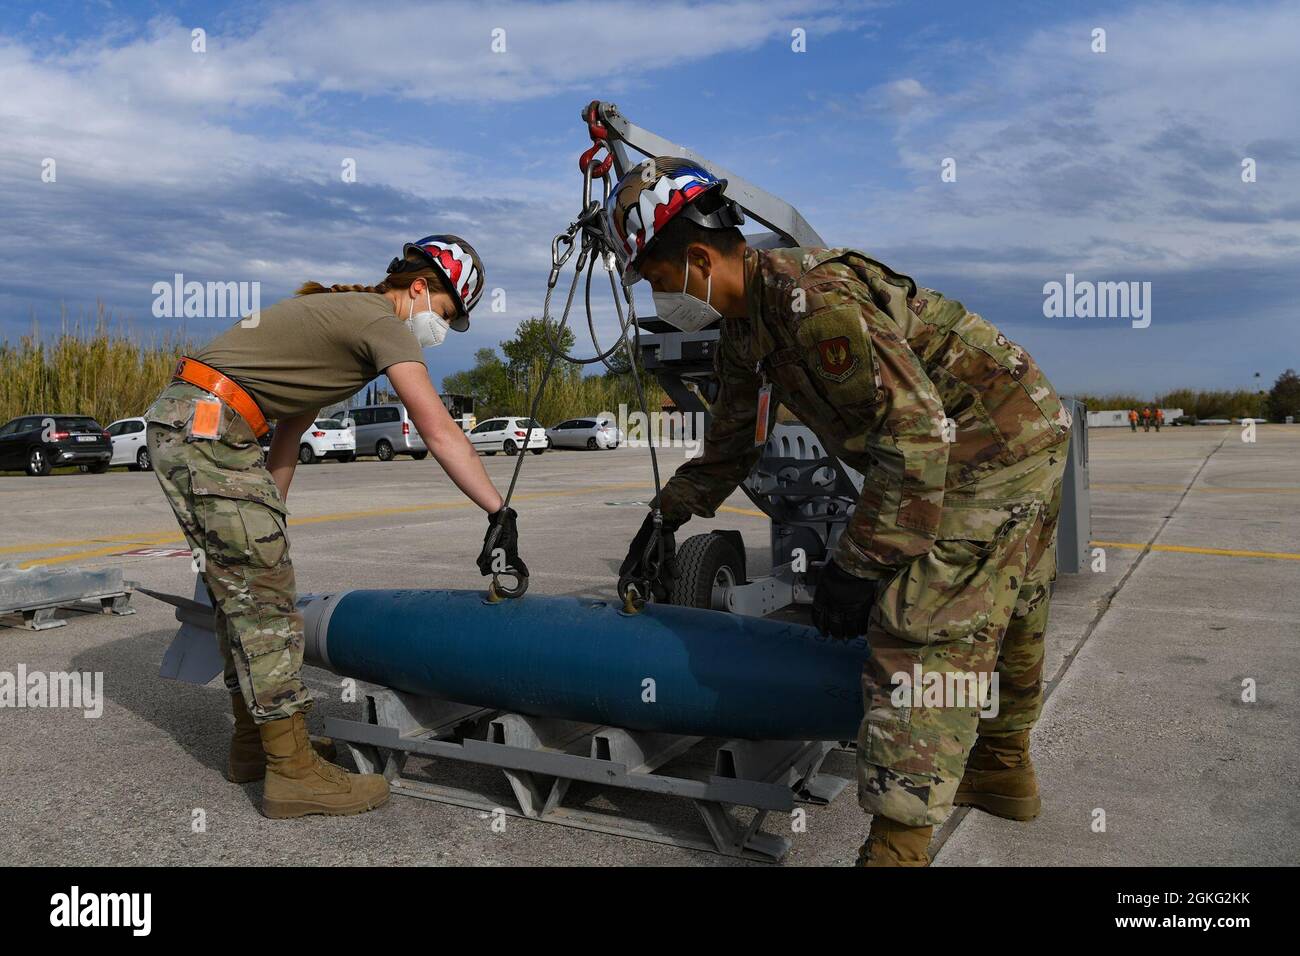 U.S. Airmen with the 31st Munitions Squadron (MUNS) hook an inert bomb onto a bomb lift at Andravida Air Base, Greece, April 13, 2021. The 31st MUNS, along with other units from the 31st Fighter Wing, participated in INIOCHOS 21, a Hellenic air force-led, joint force exercise. Stock Photo